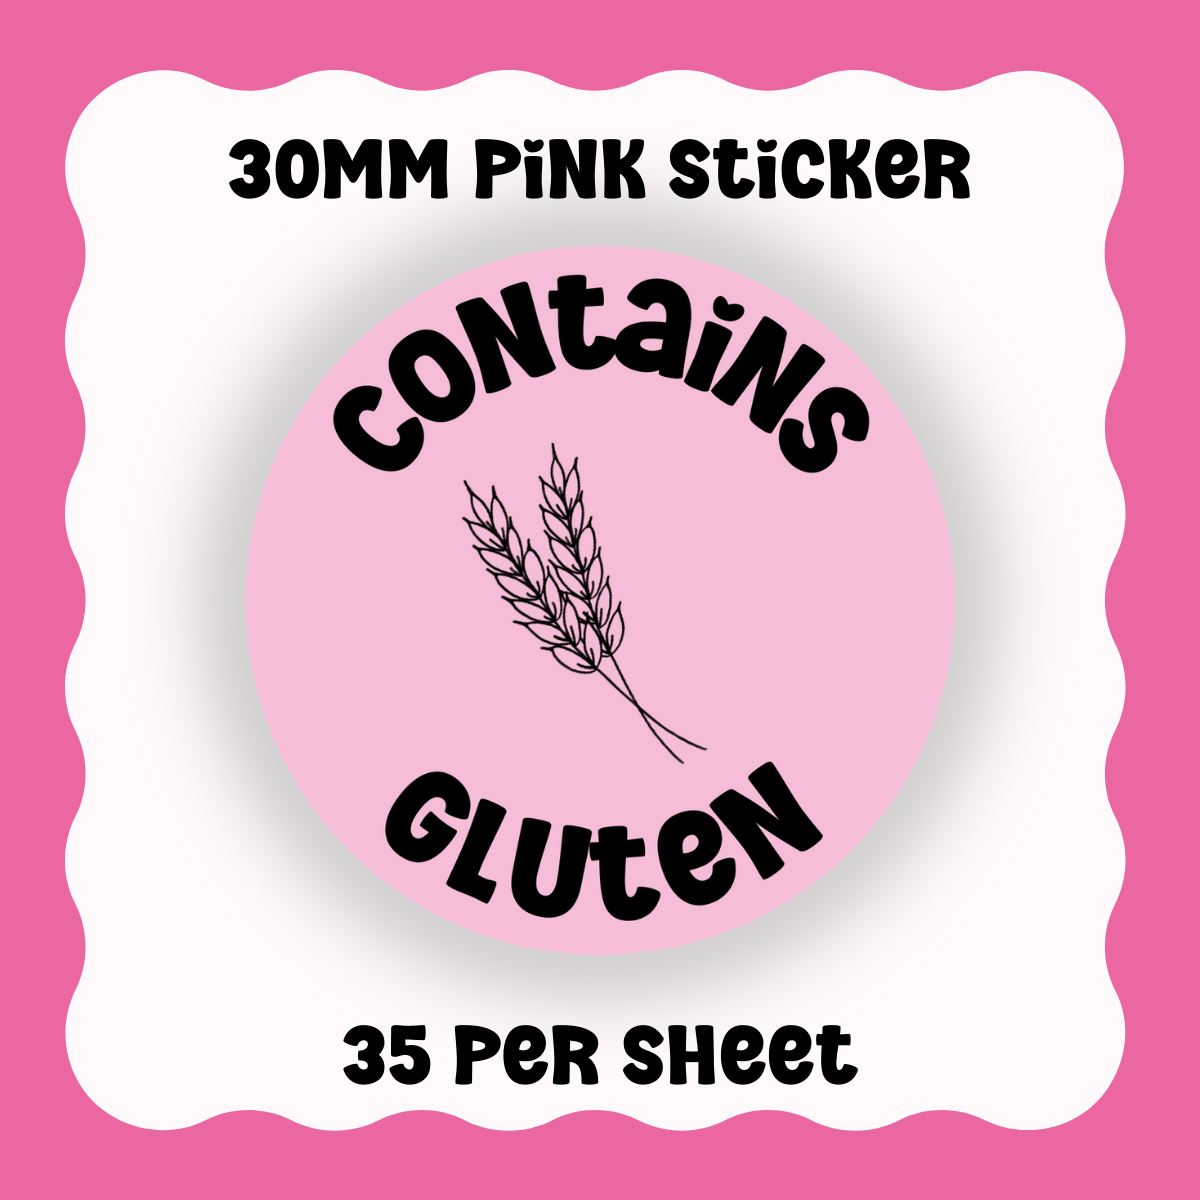 Contains Gluten - With Graphic